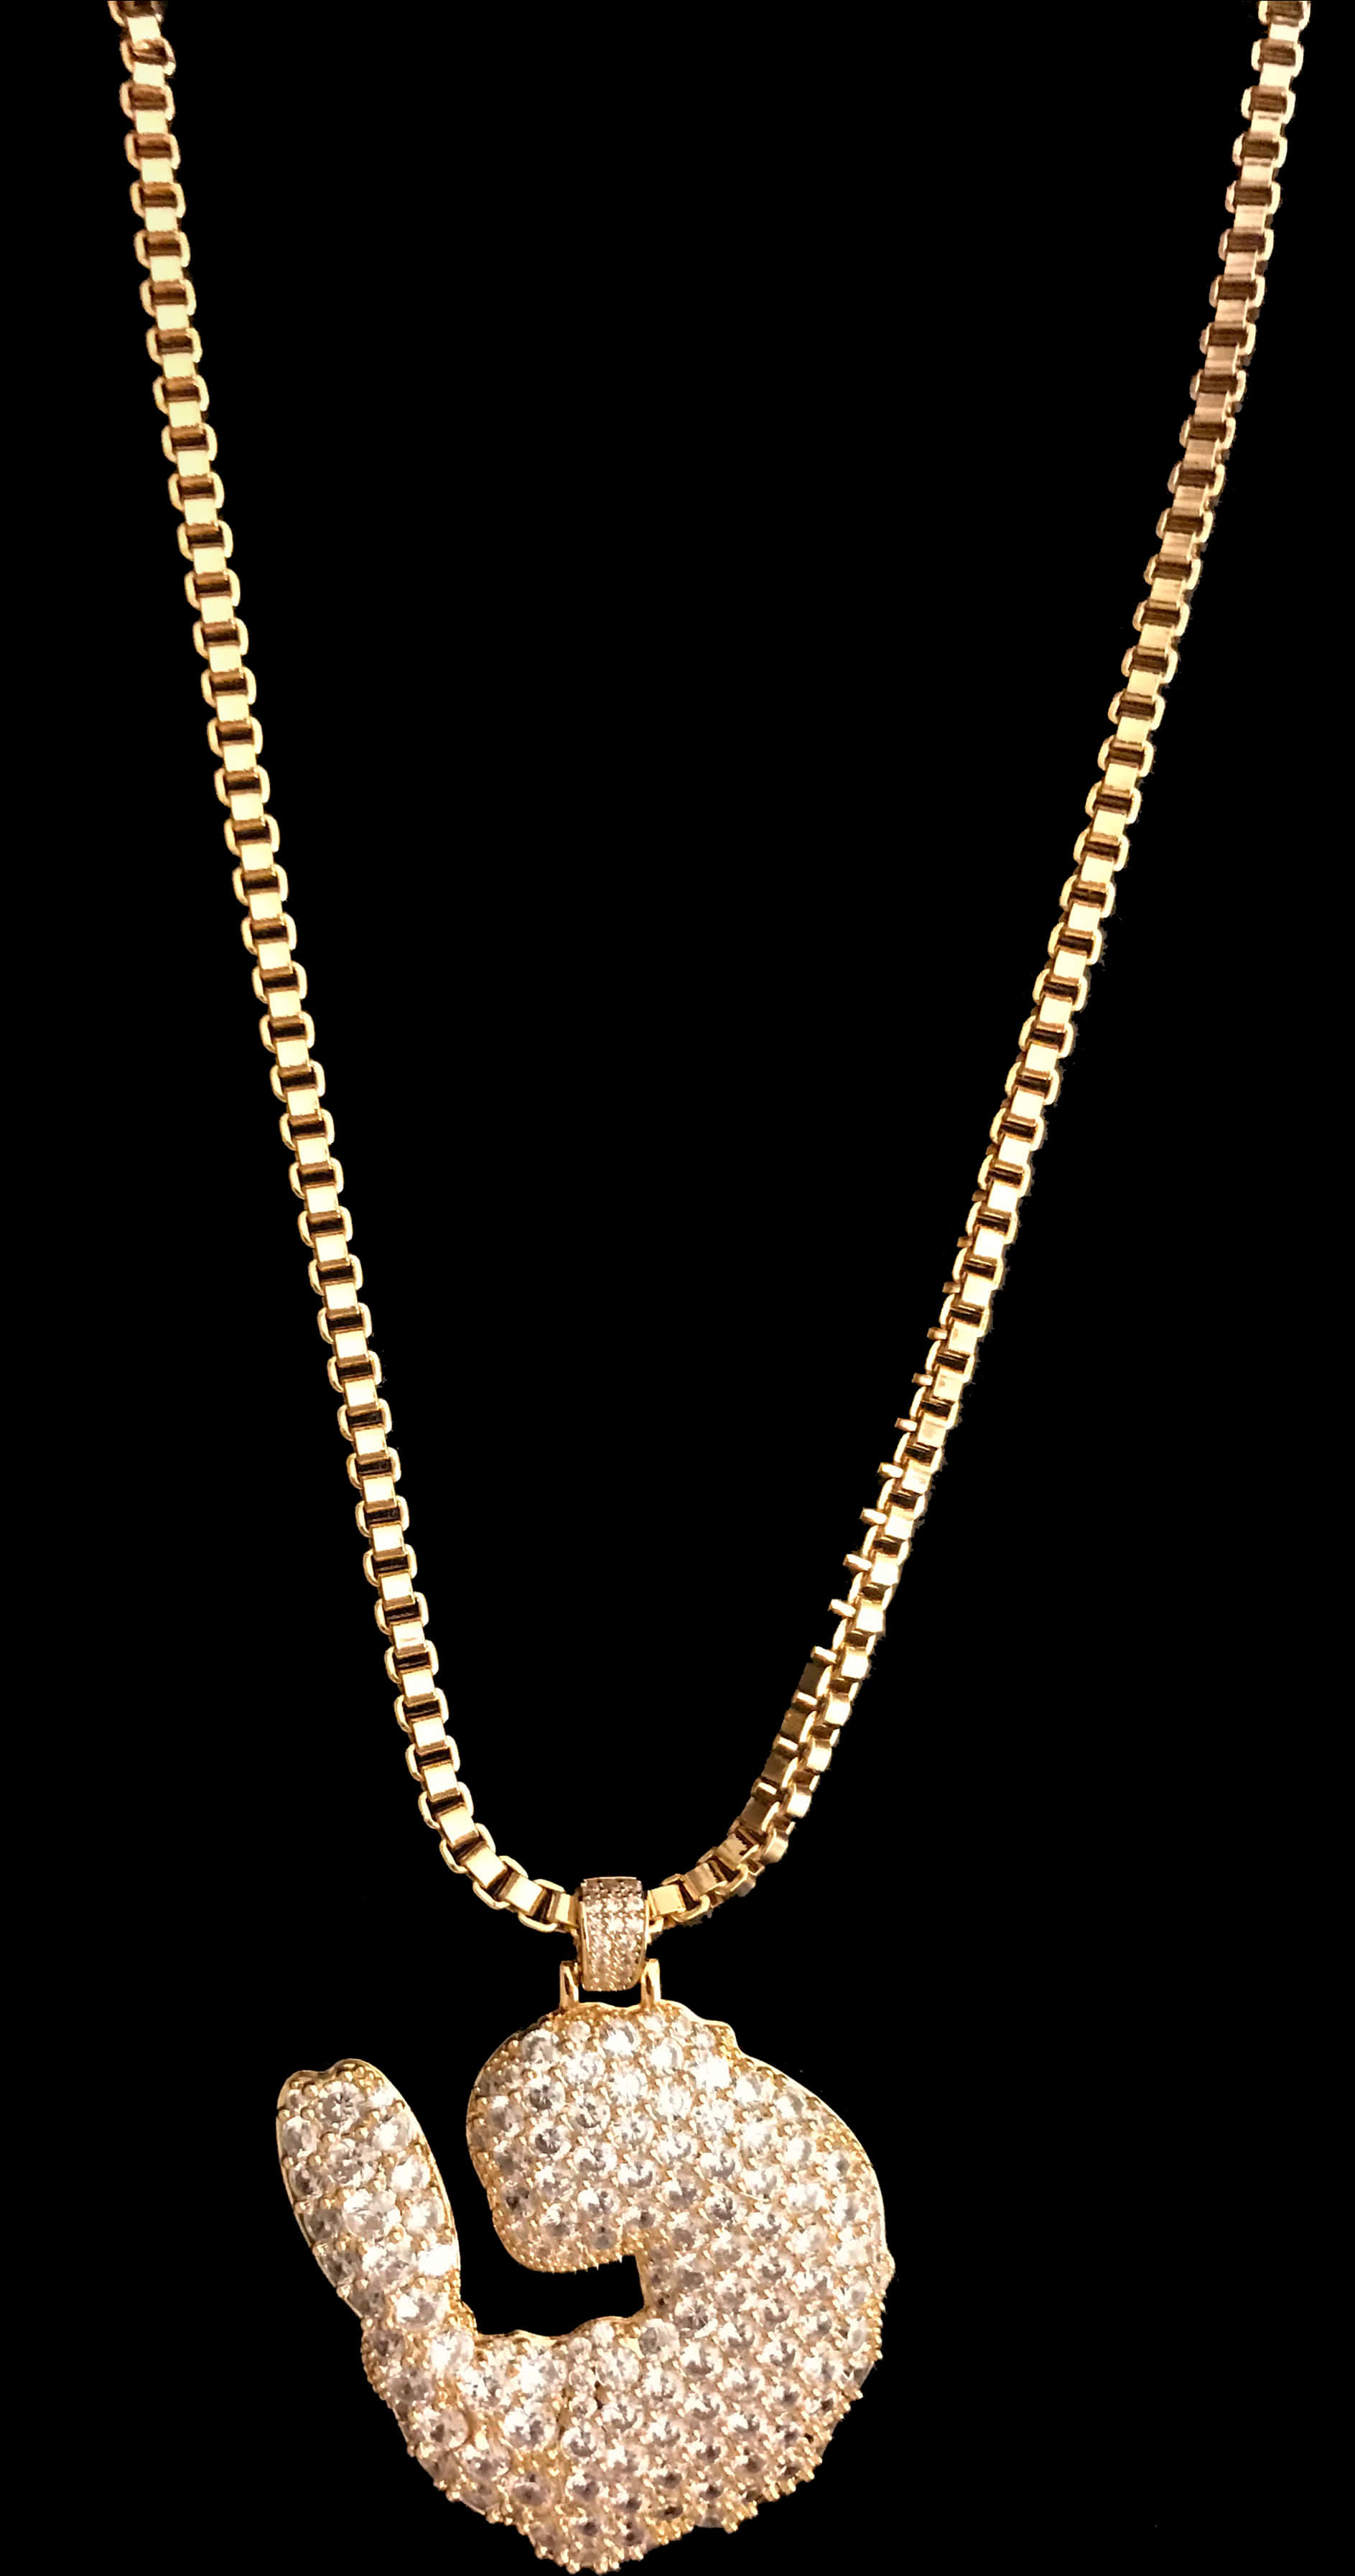 A Gold Chain With A Pendant